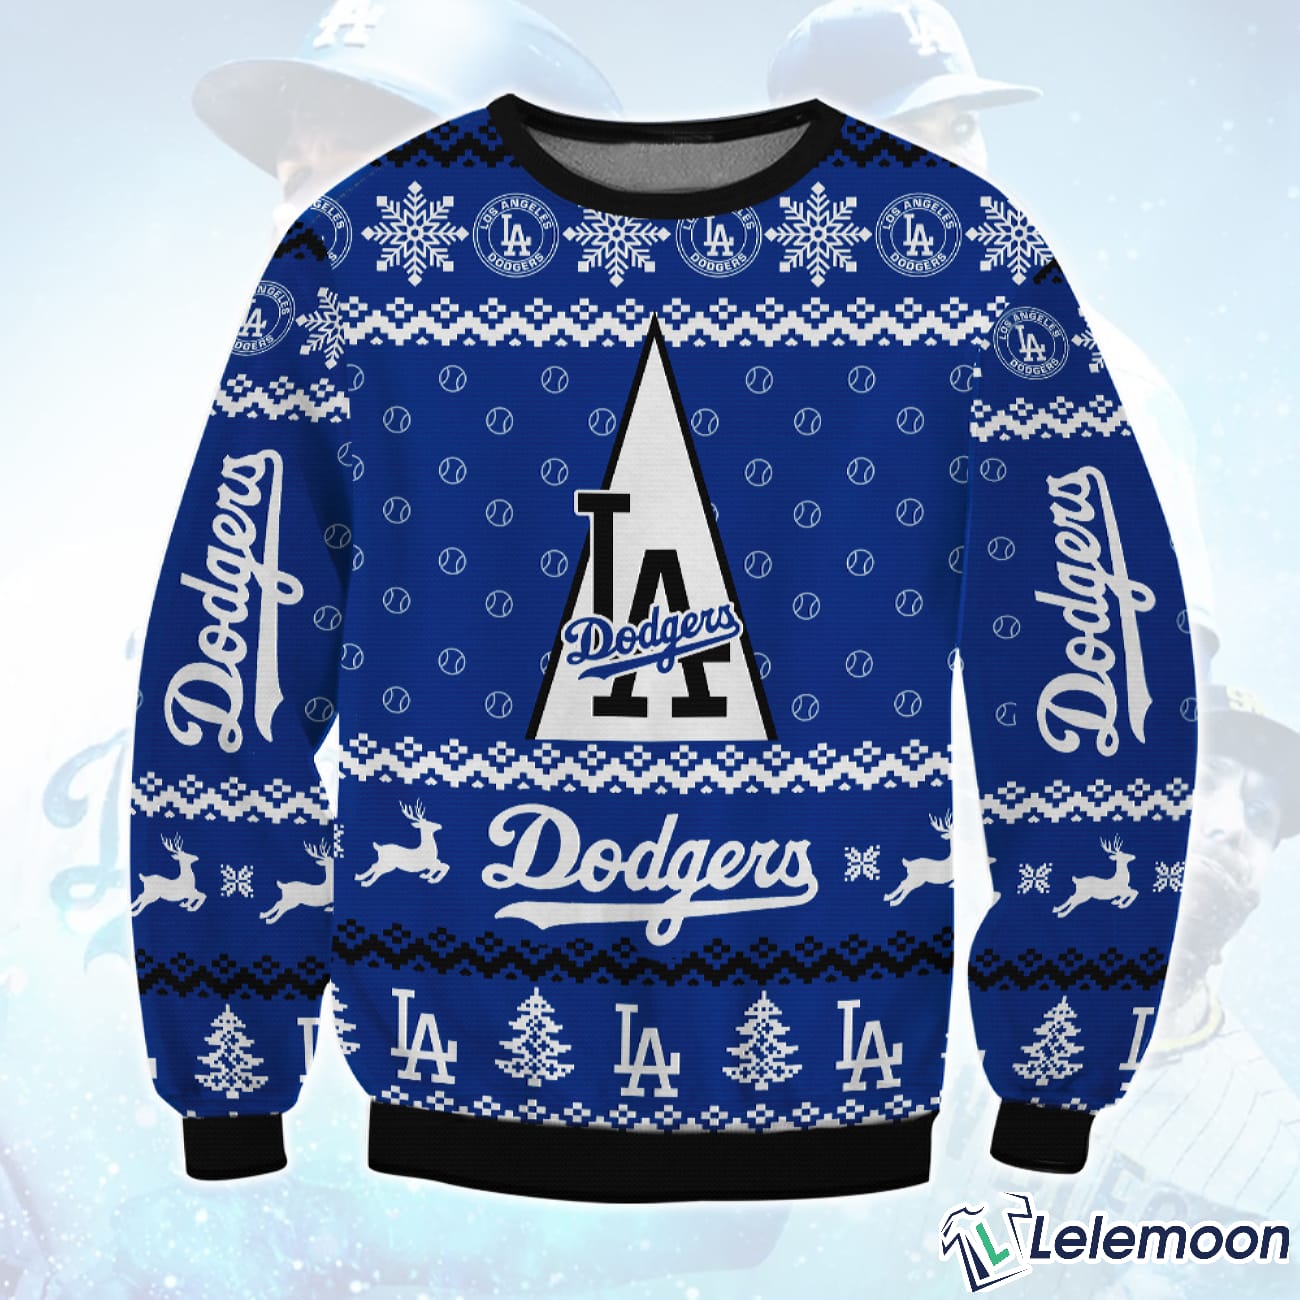 Los Angeles Dodgers Busy Block MLB Ugly Sweater